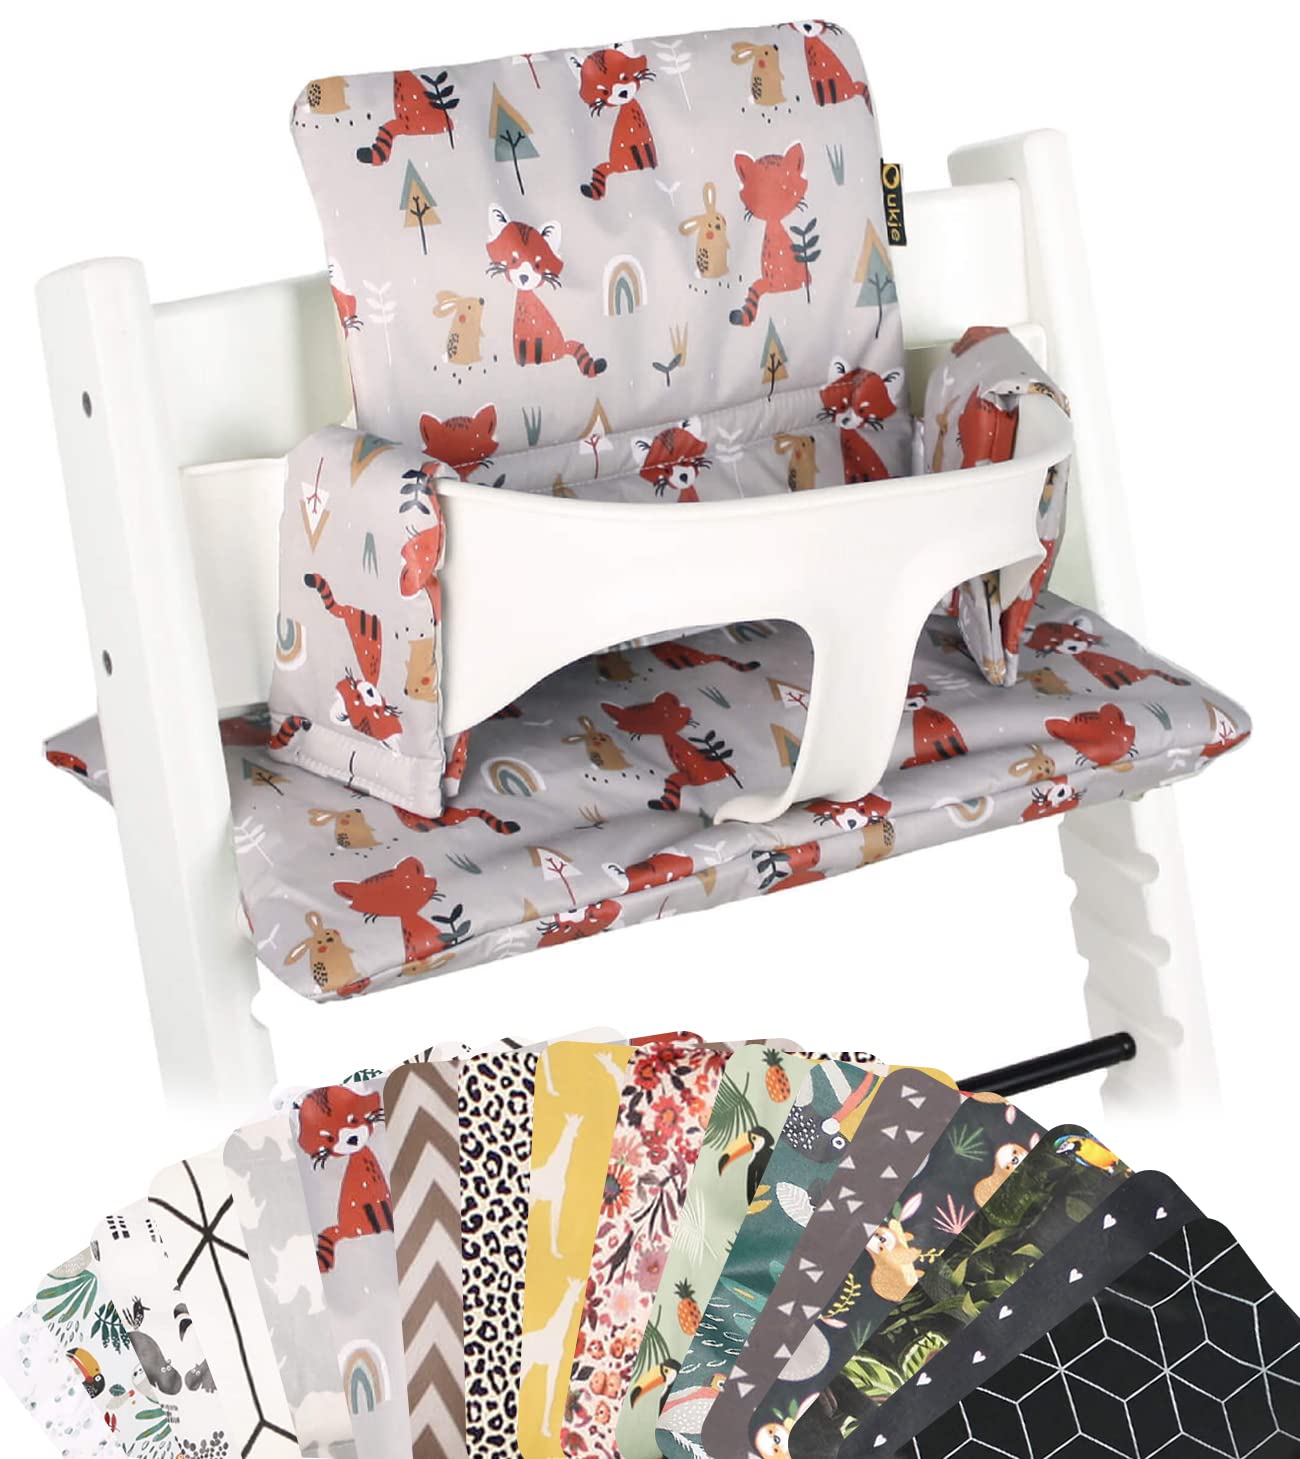 Ukje Seat Cushion for Stokke Tripp Trapp High Chair, Many Colours and Patterns, Handmade in Europe, Suitable as Stokke Tripp Trapp Seat Cushion, Washable, Stokke Seat Cushion